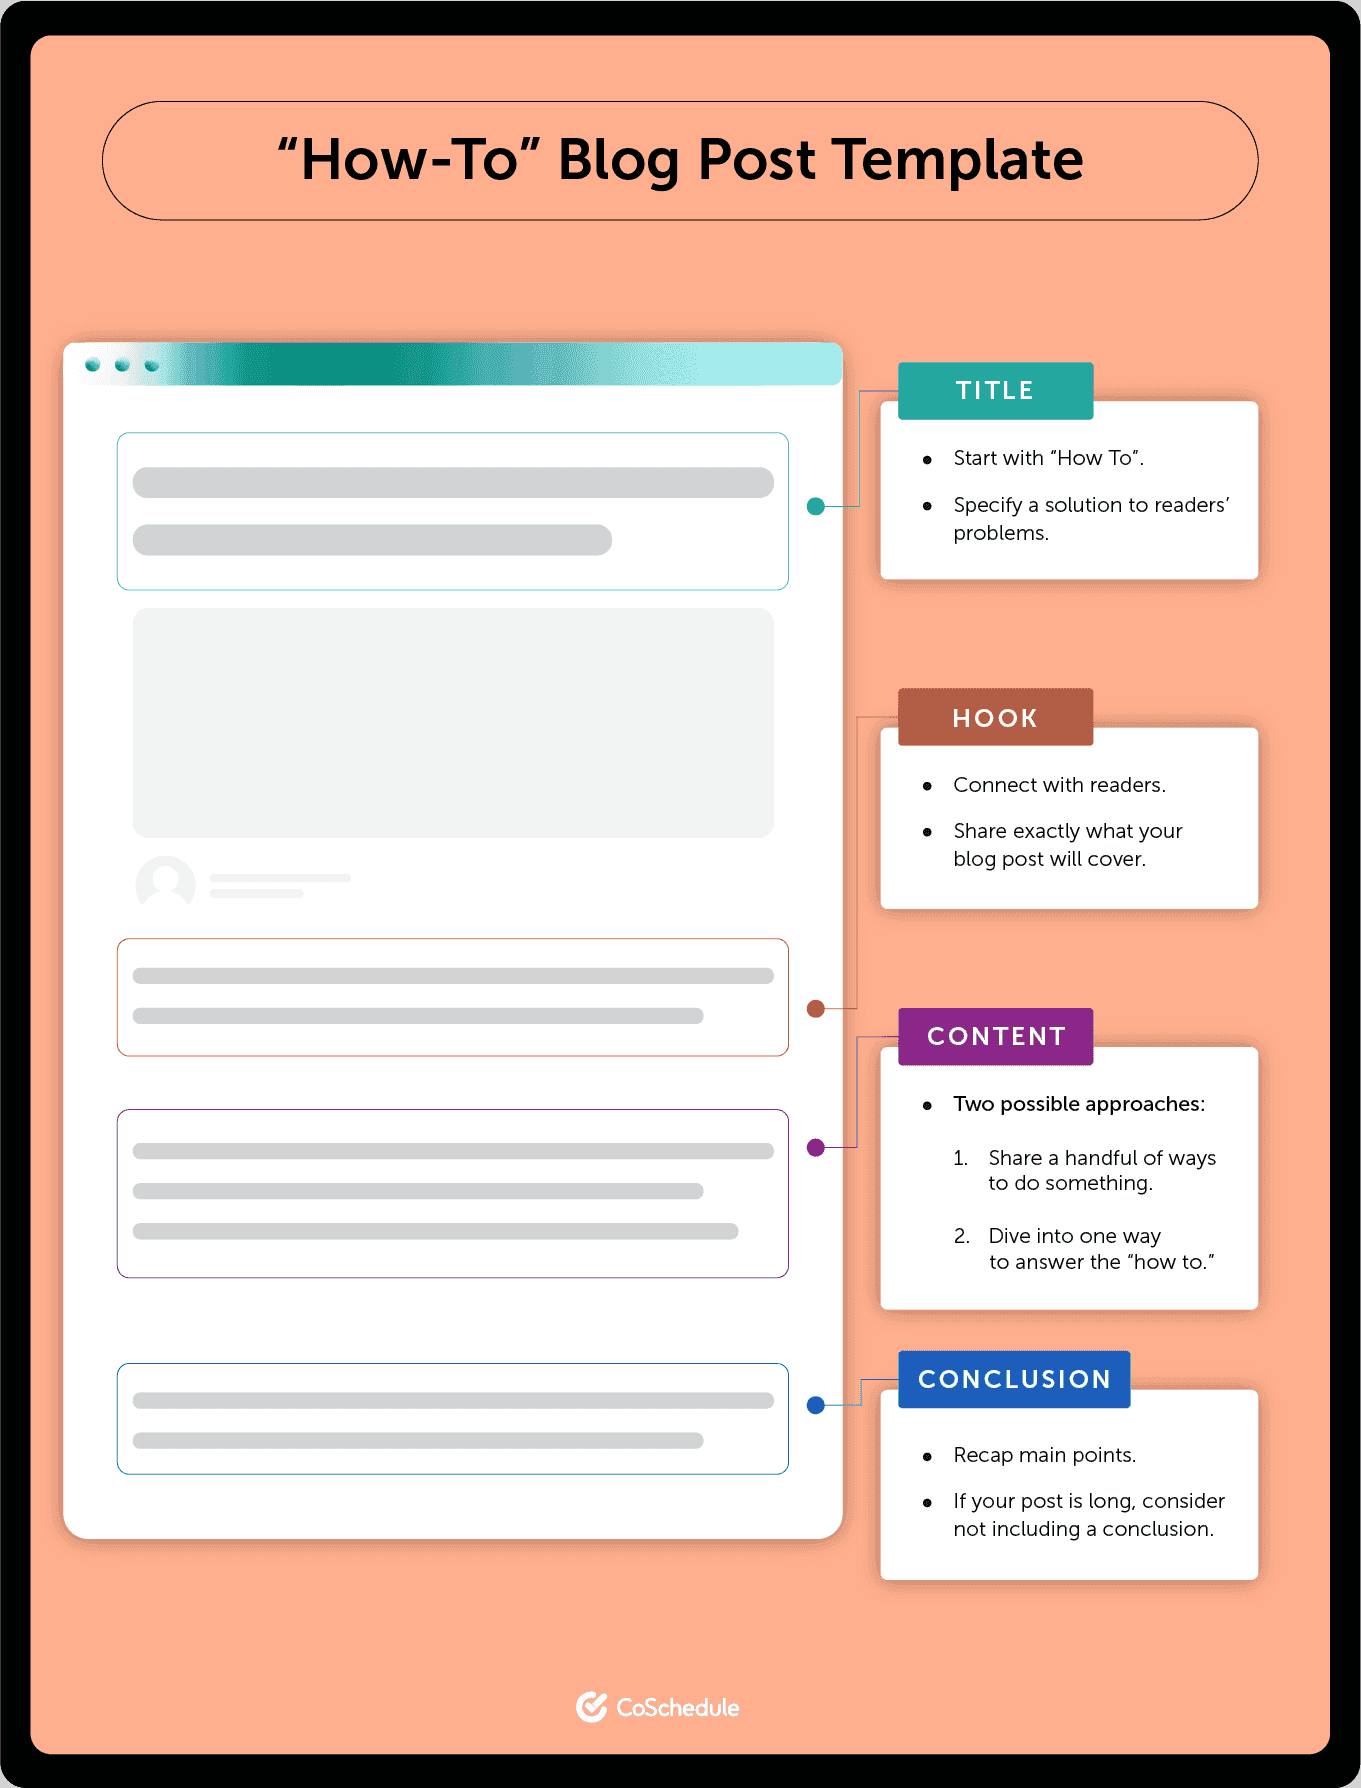 "How-To" Blog Post Template